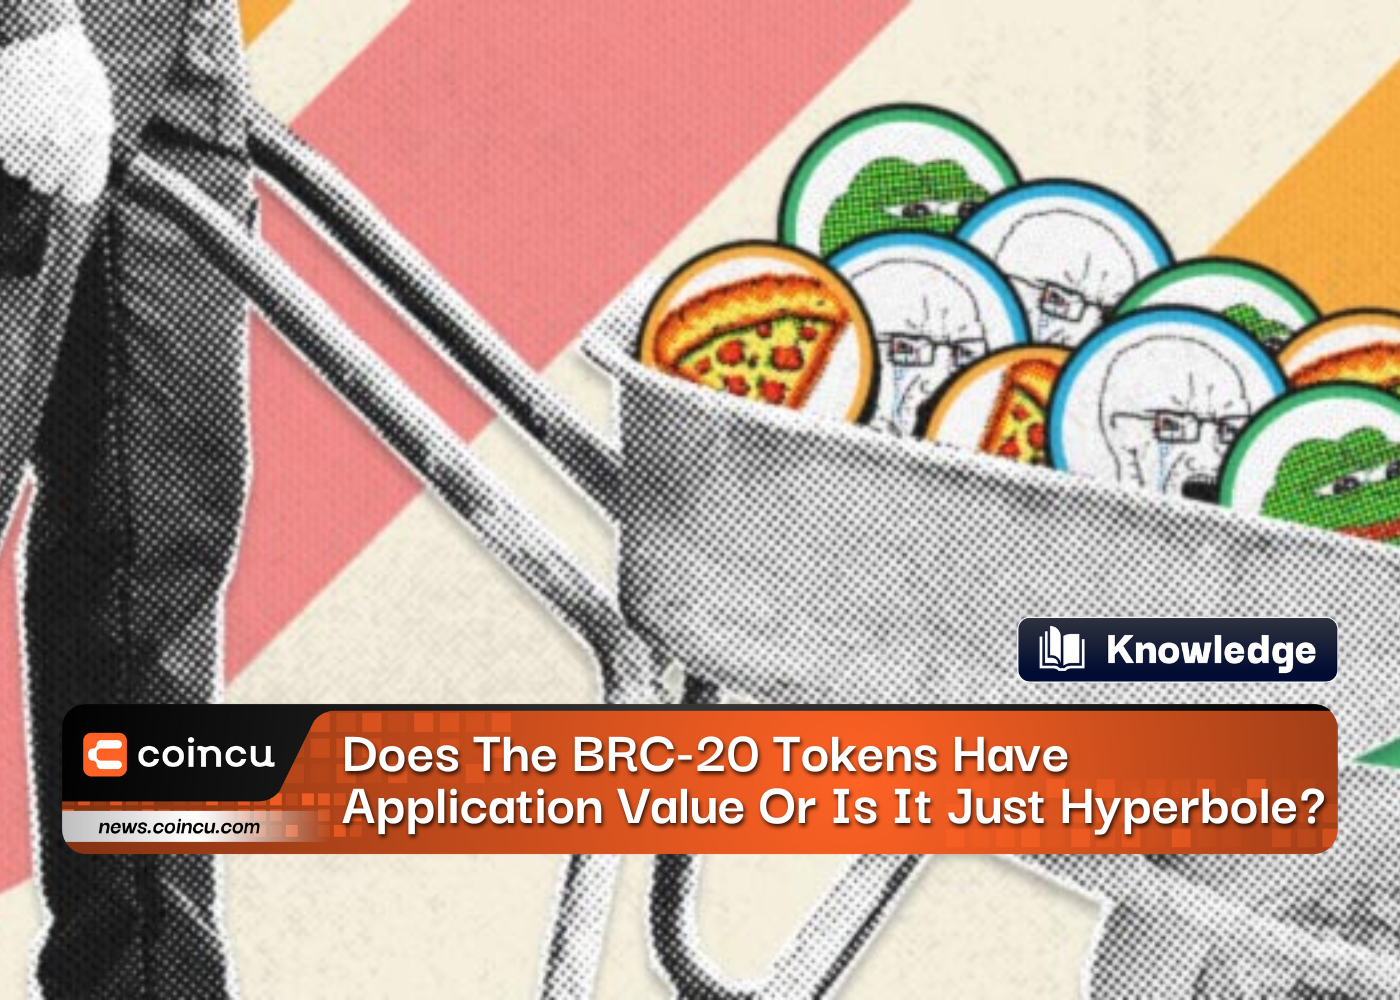 Does The BRC-20 Tokens Have Application Value Or Is It Just Hyperbole?